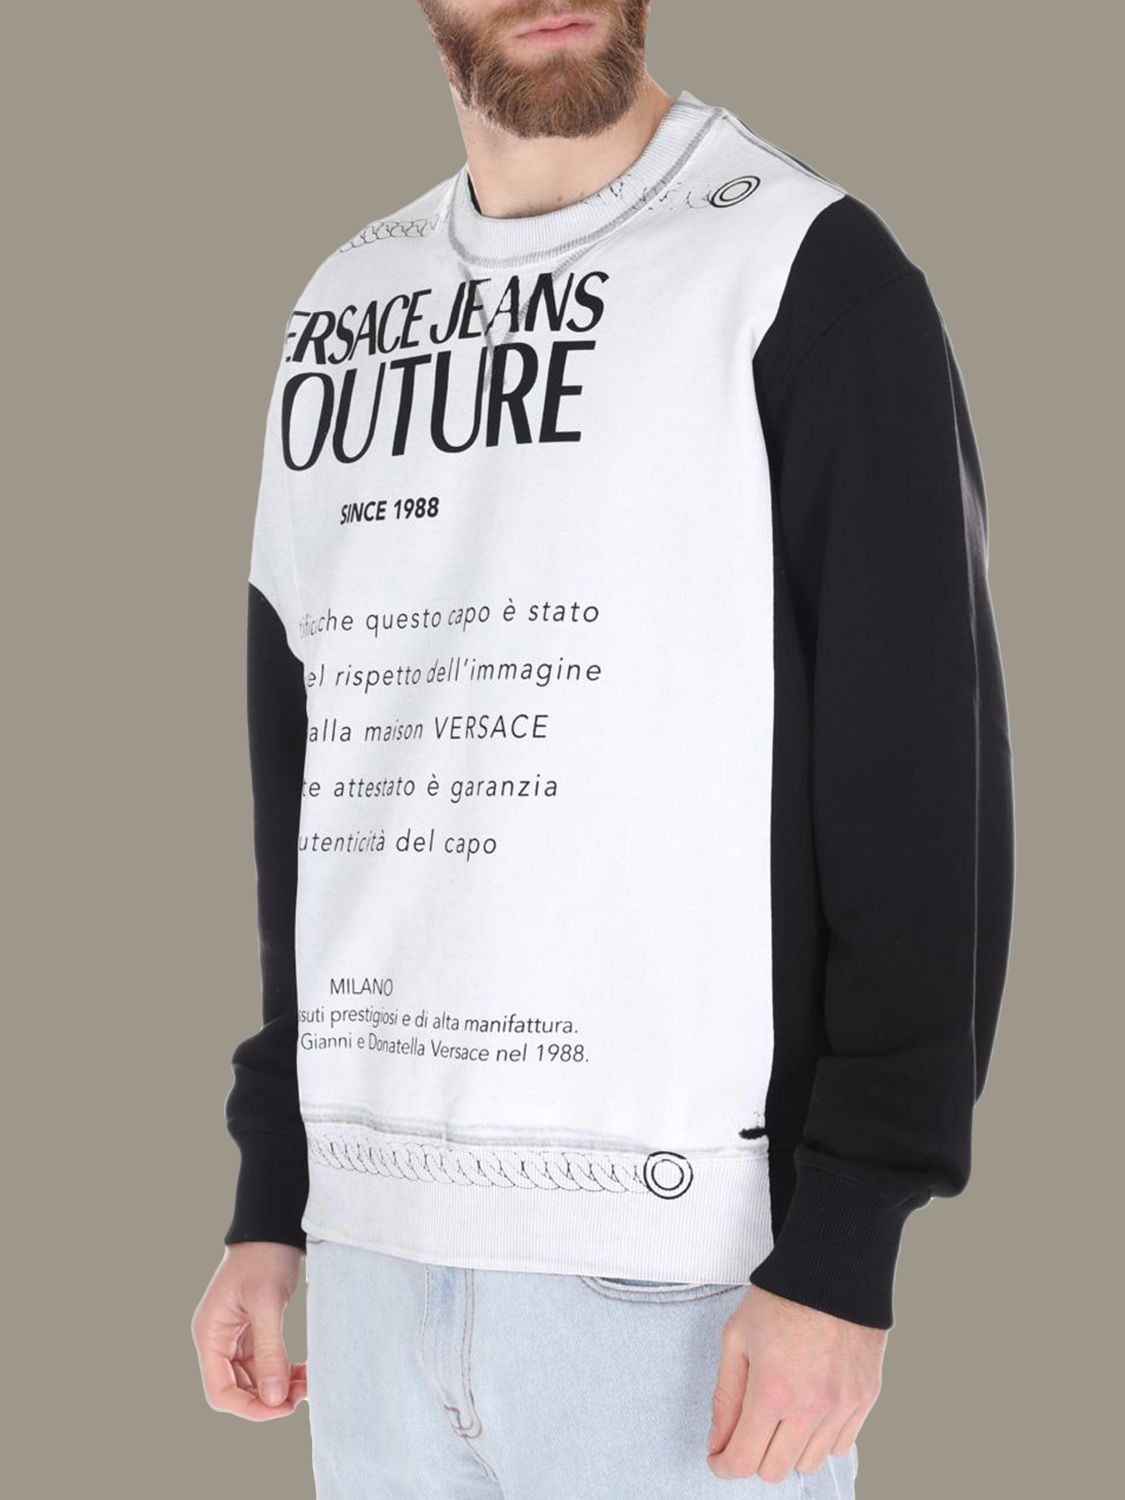 Versace Jeans Outlet Sweatshirt With Print Sweatshirt Versace Jeans Men Black Sweatshirt Versace Jeans gva7f Giglio En